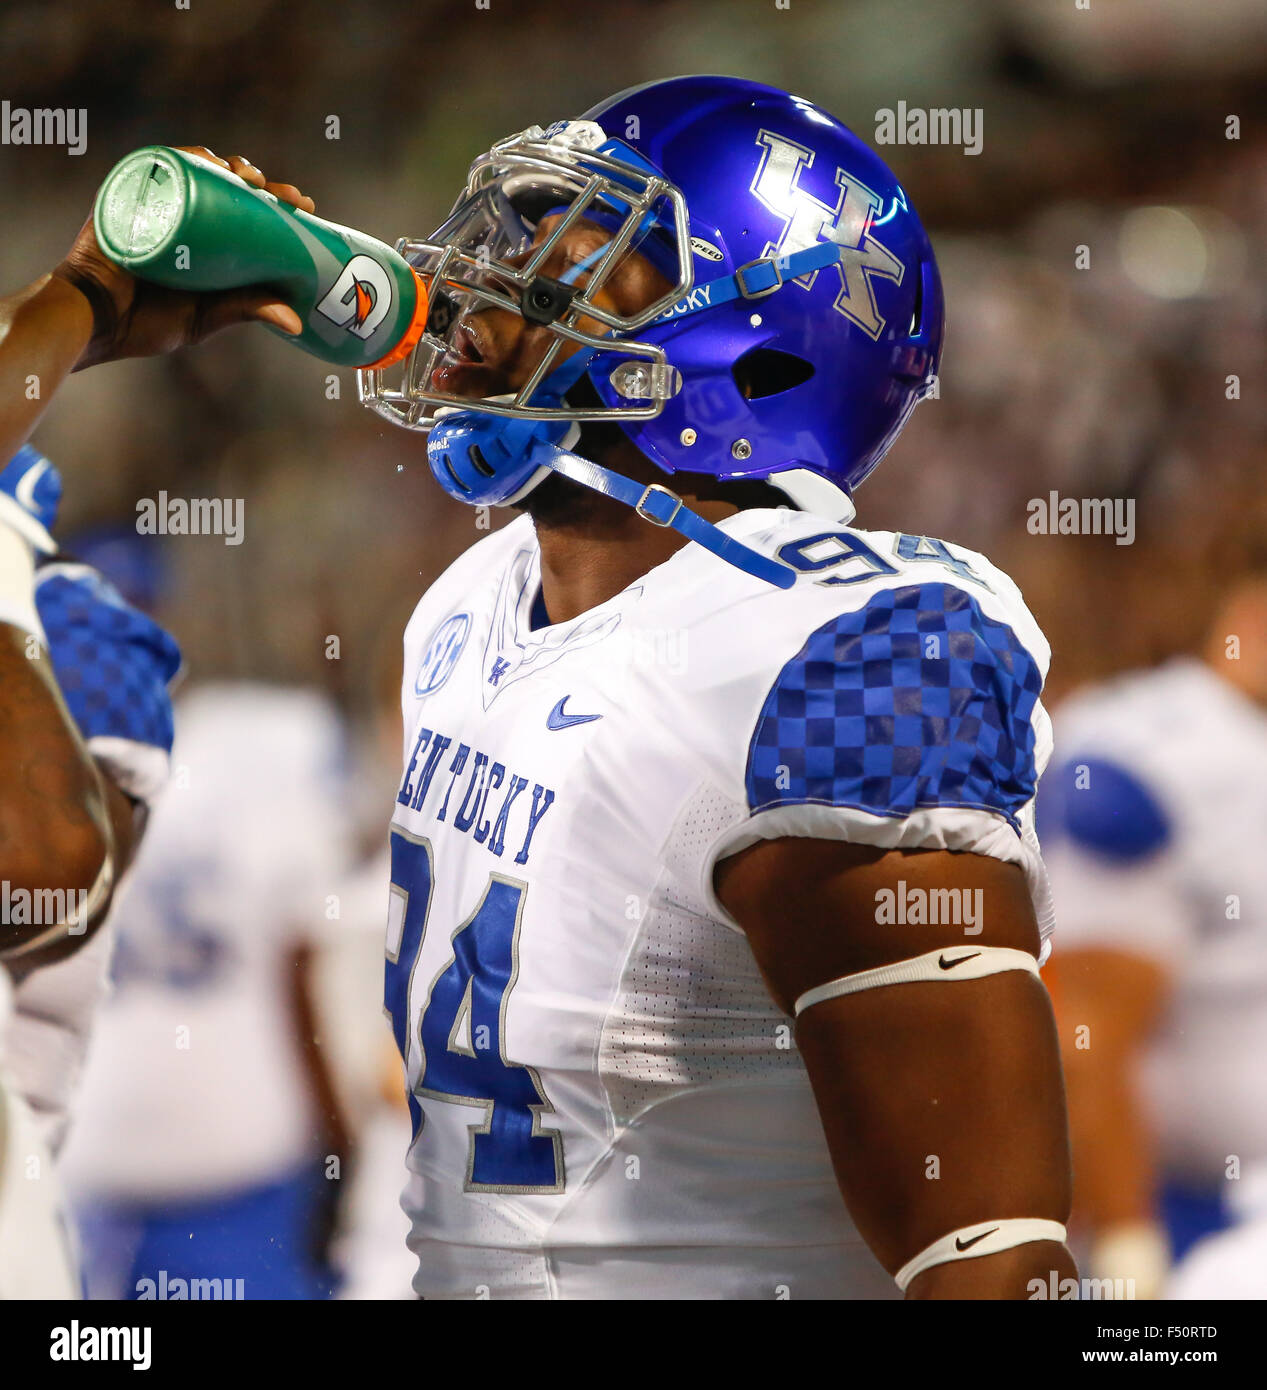 Starkville, MS, USA. 24th Oct, 2015. Kentucky Wildcats defensive tackle Courtney Miggins (94) on the sidelines during the NCAA Football game between the Mississippi State Bulldogs and the Kentucky Wildcats at Davis Wade Stadium in Starkville, MS. Chuck Lick/CSM/Alamy Live News Stock Photo